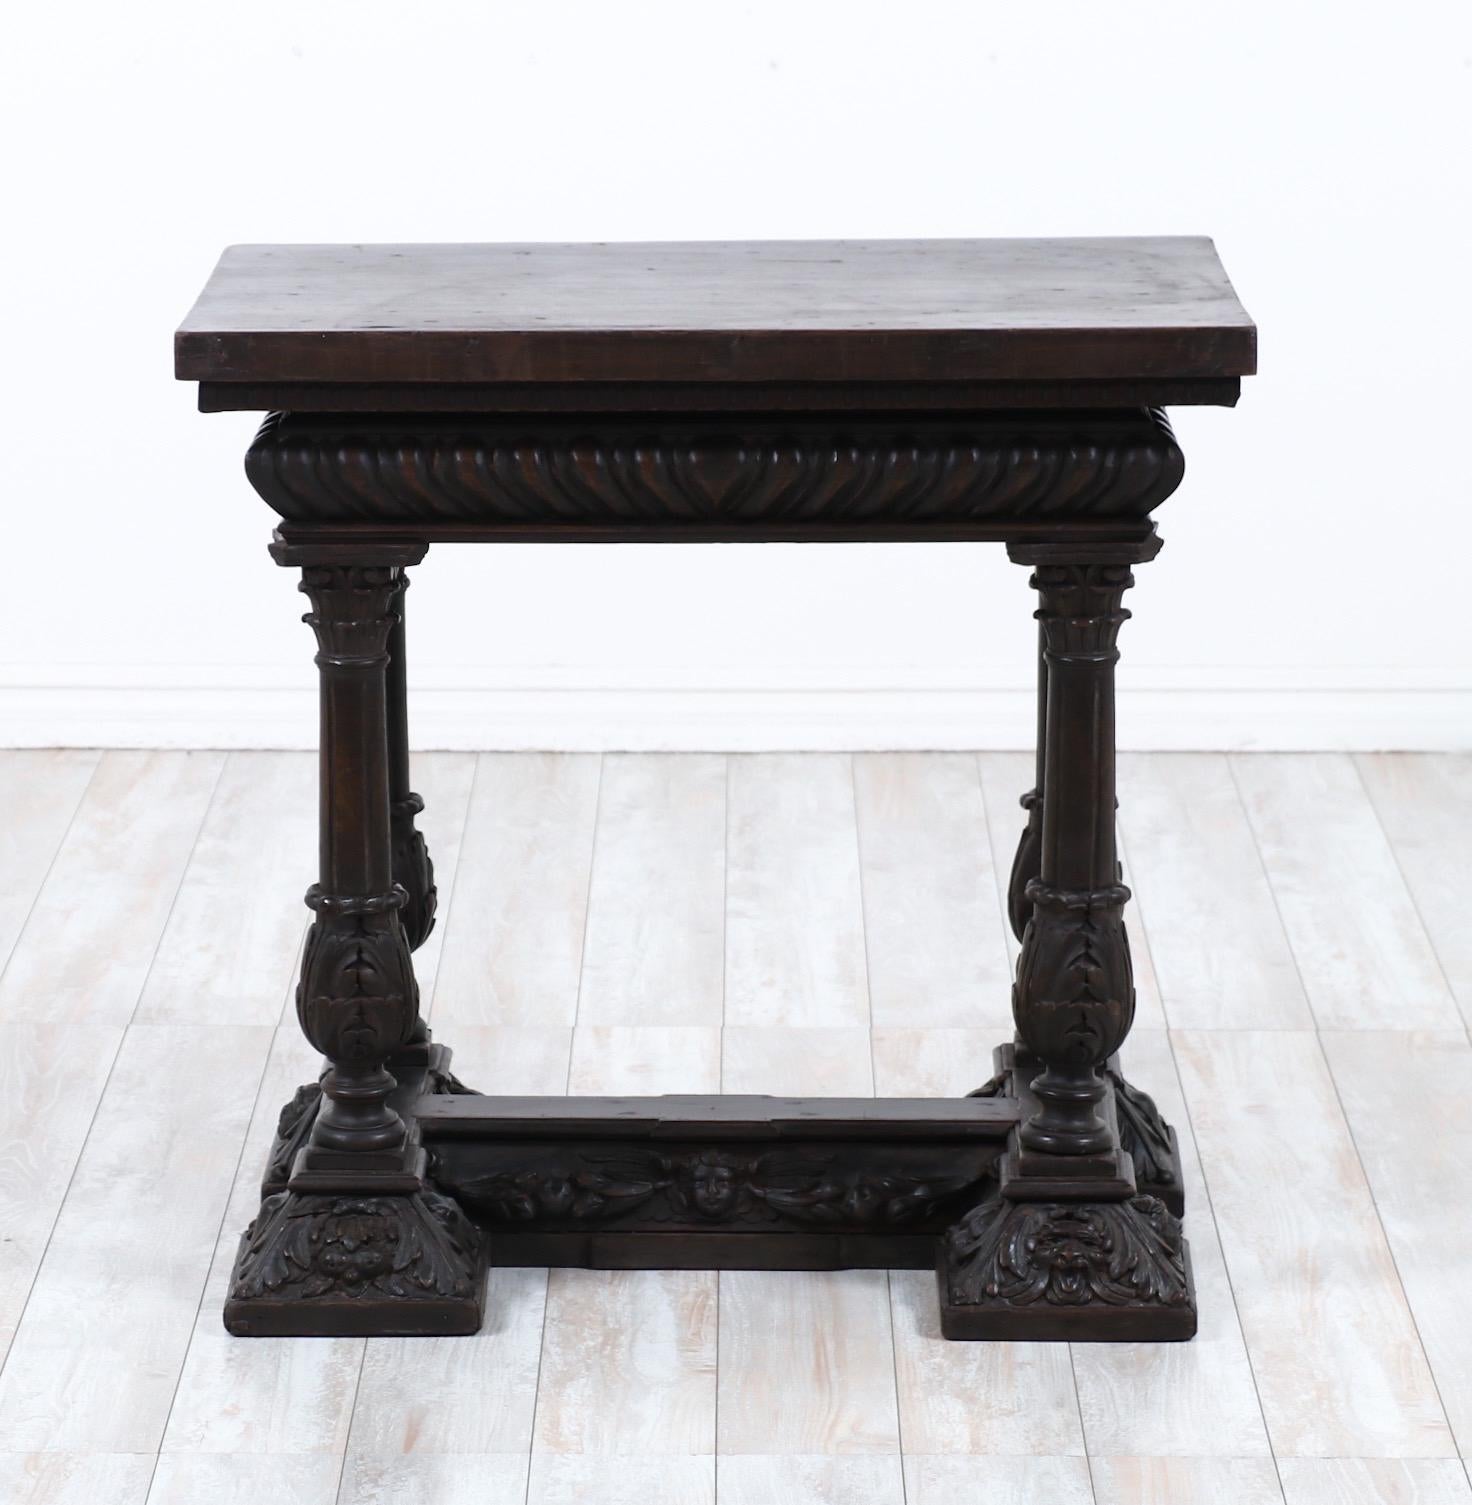 Glorious, 19th century Italian carved walnut center table in the Renaissance style 

This rare table consists of a solid rectangular top with a a heavily carved base including detailed columns, depictions of cherubs, animals and floral